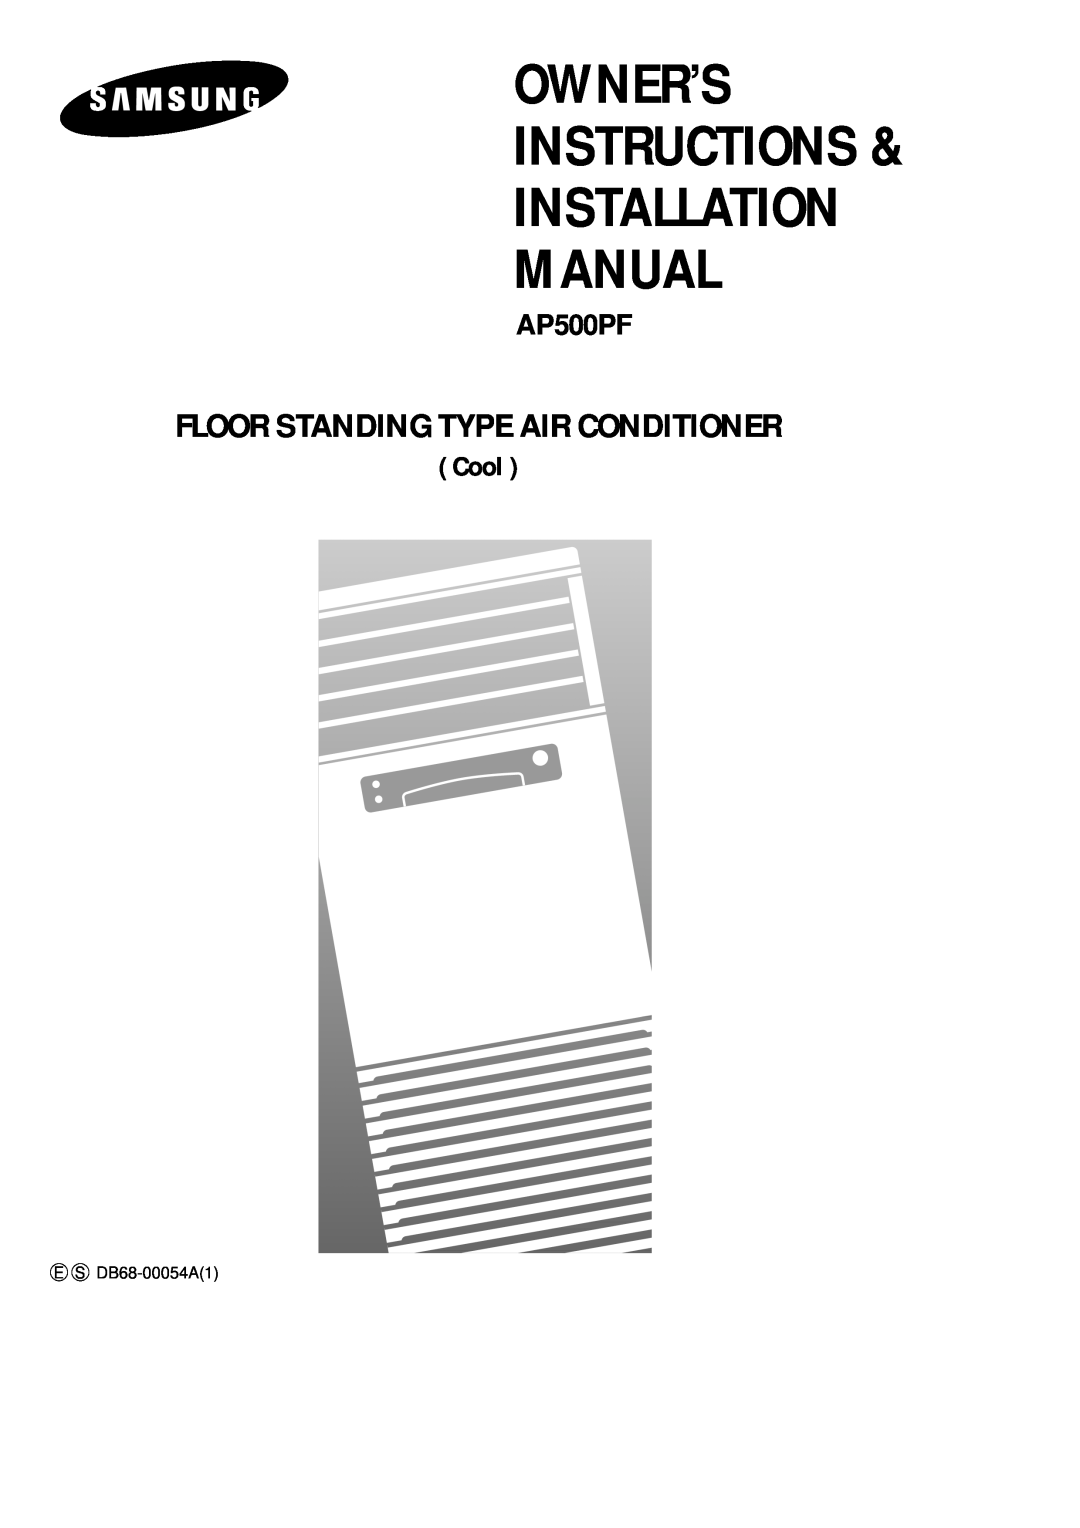 Samsung AP500F installation manual Floor Standing Type Air Conditioner, Cool, Owner’S Instructions & Installation Manual 